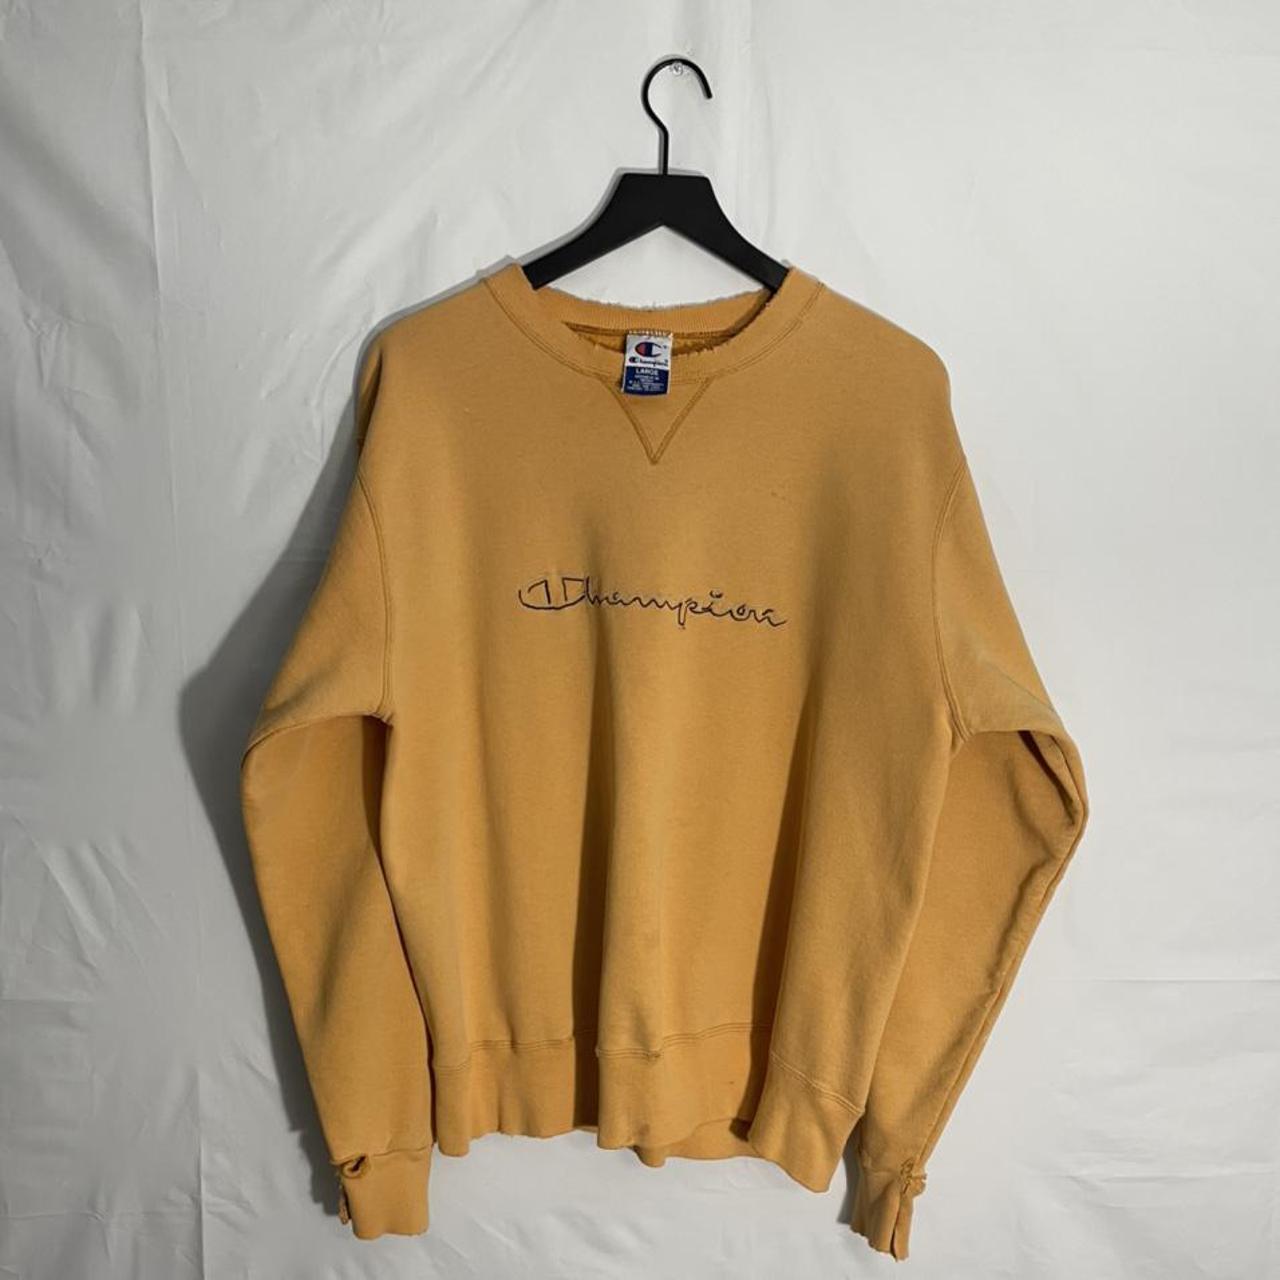 Product Image 1 - Champion Essential Yellow 90s Sweater

Champion